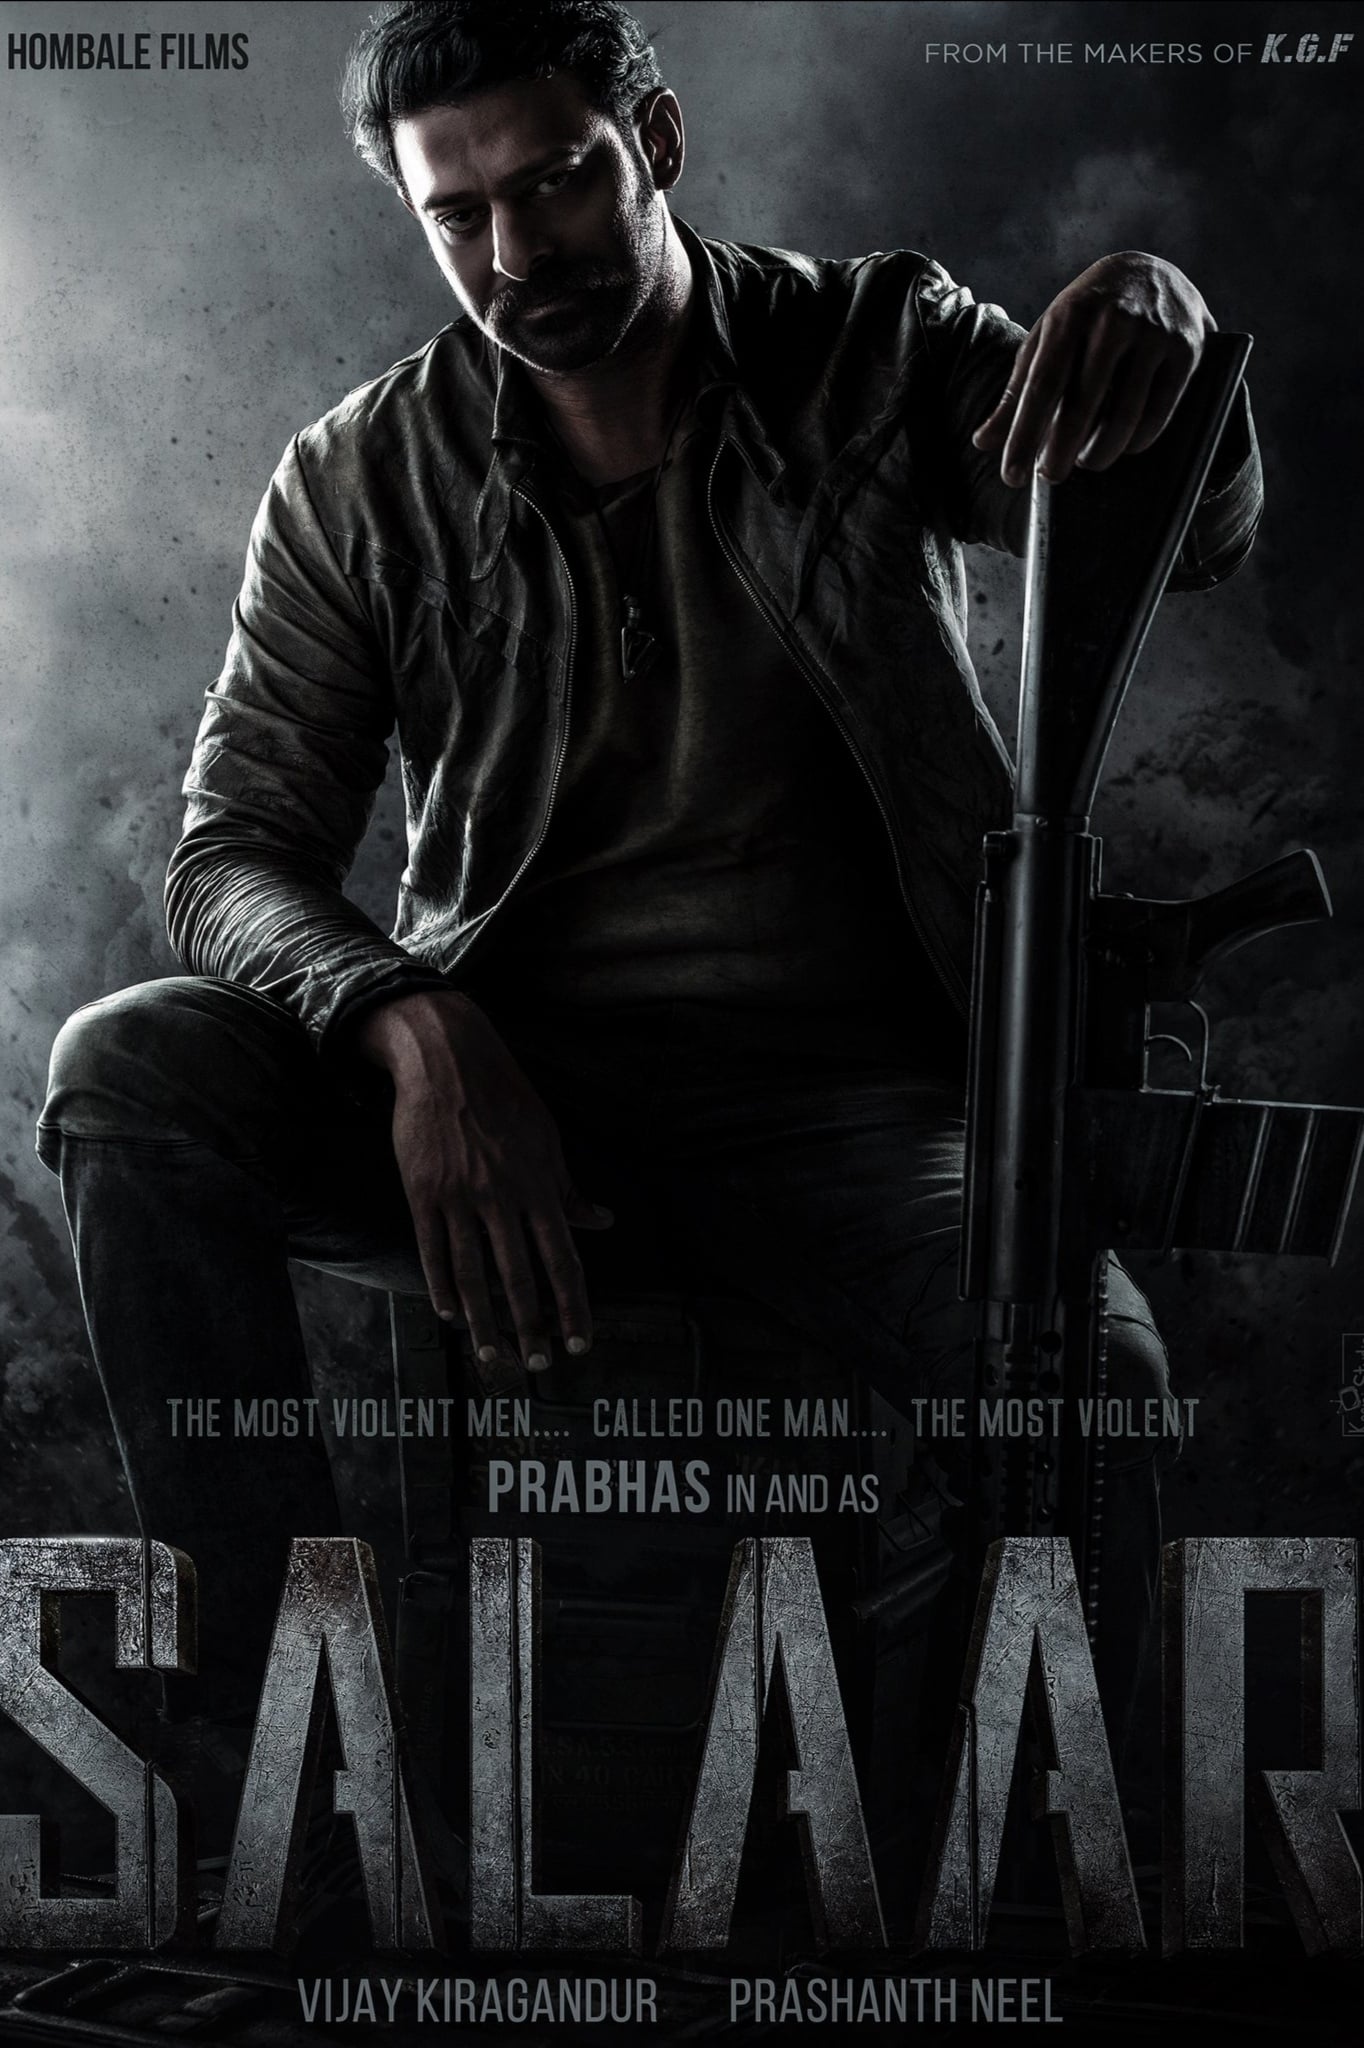 Poster for the movie "Salaar"